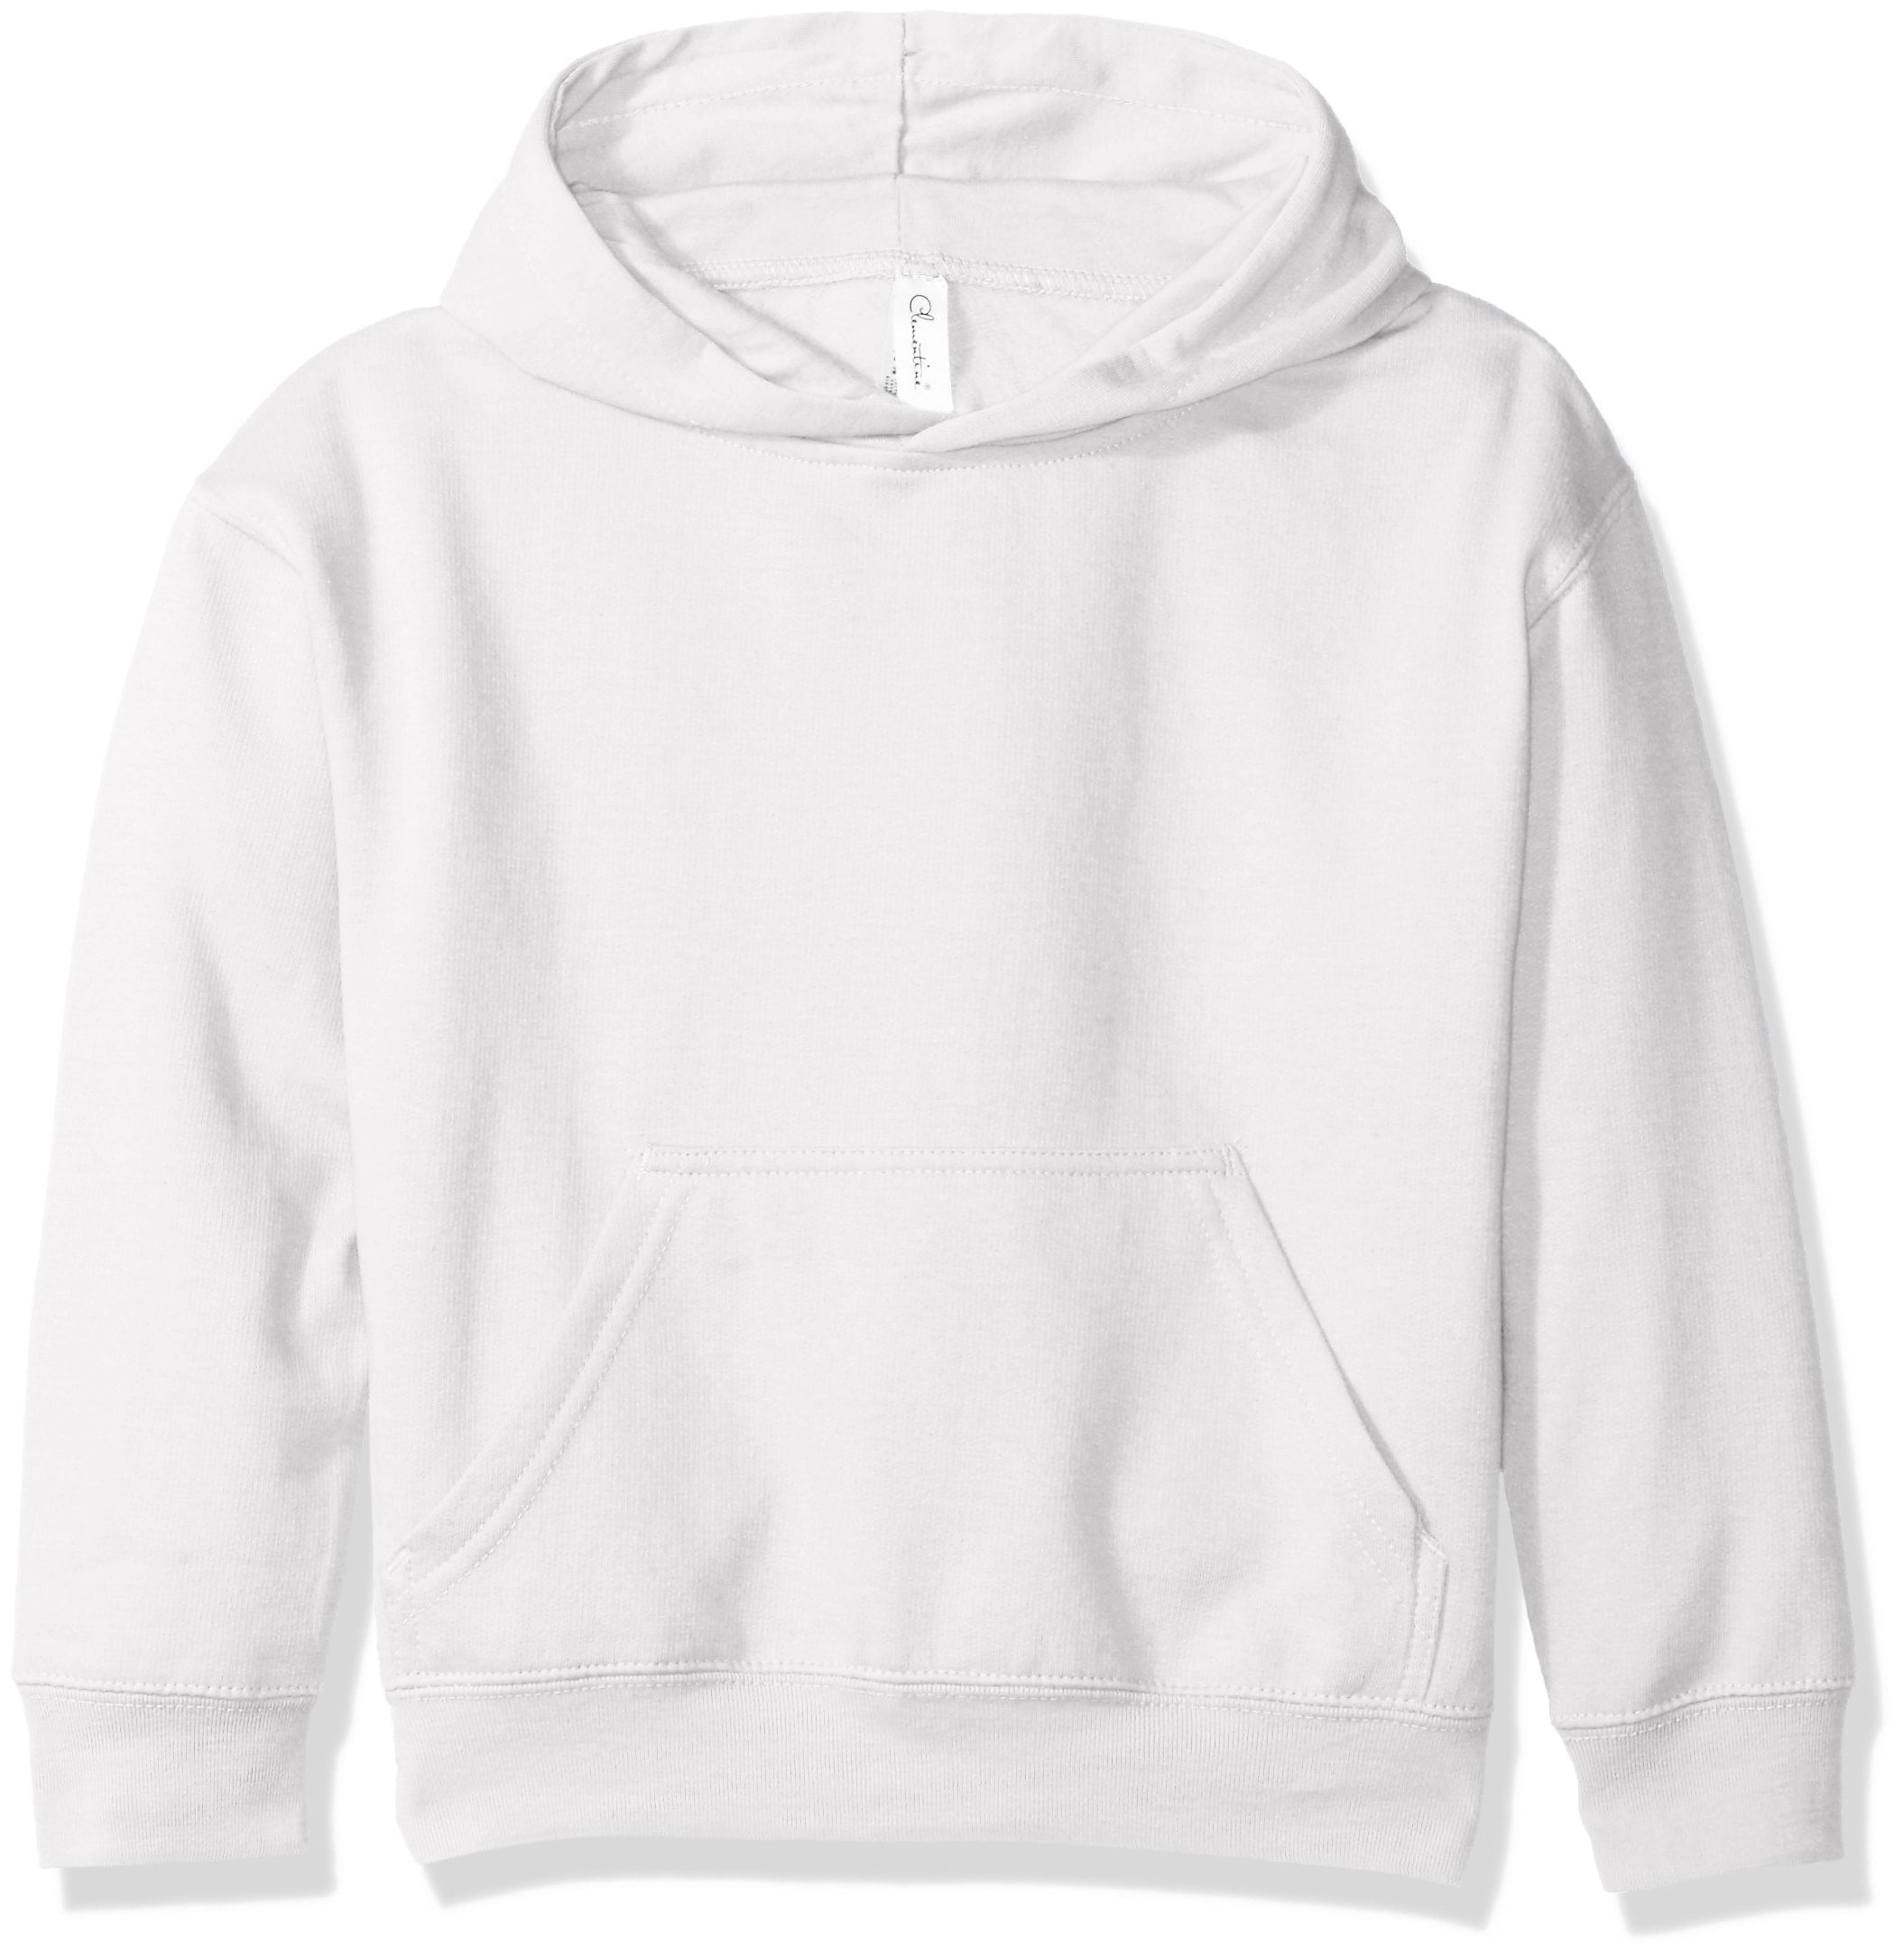 Girls Youth Hooded Pullover Sweatshirt with Pouch Pocket - Walmart.com